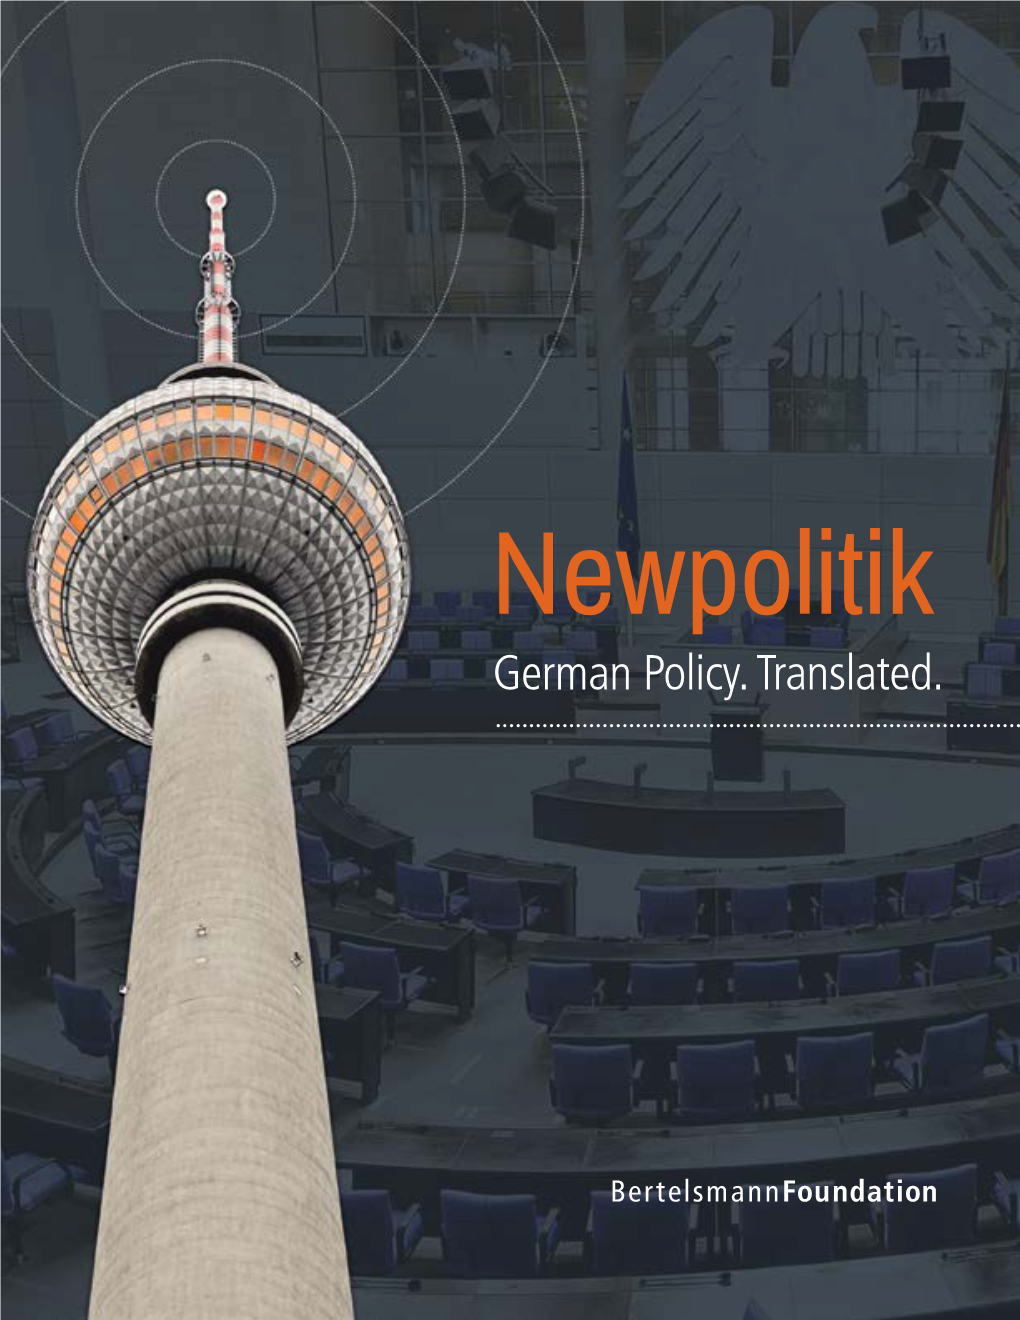 German Policy. Translated. ABOUT the BERTELSMANN FOUNDATION